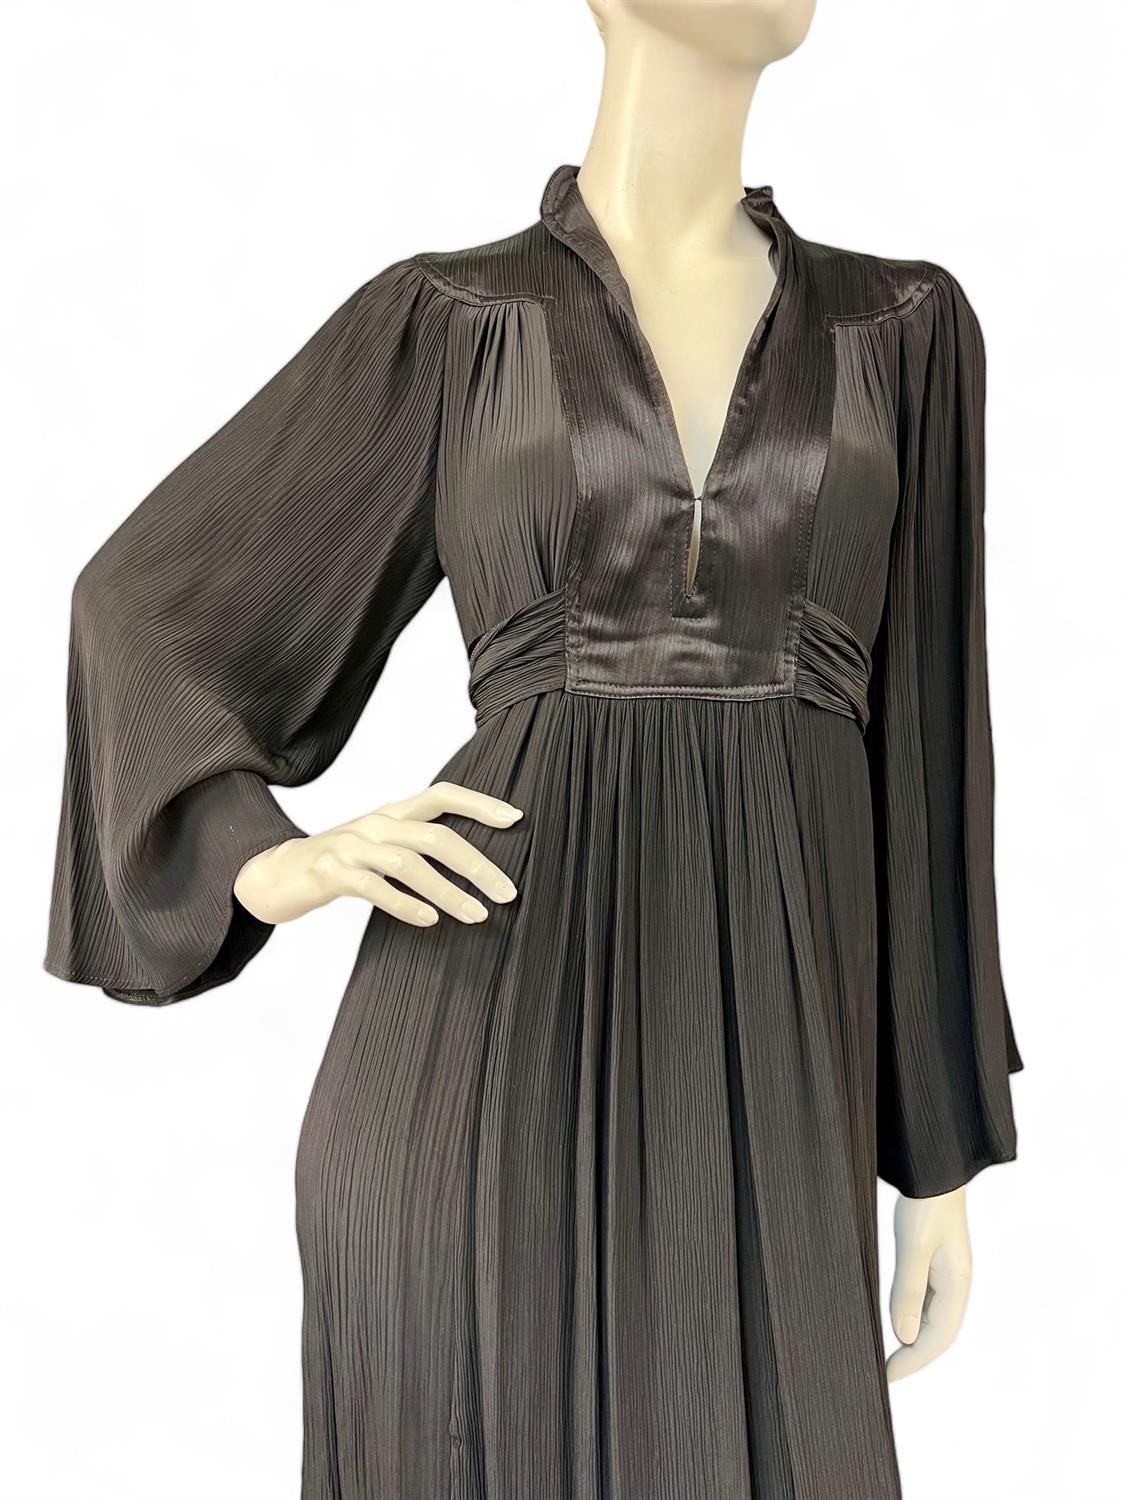 OSSIE CLARK for Radley iconic 1970s black Grecian-style pleated evening dress Fits UK0-12 (Shoulder - Image 3 of 5